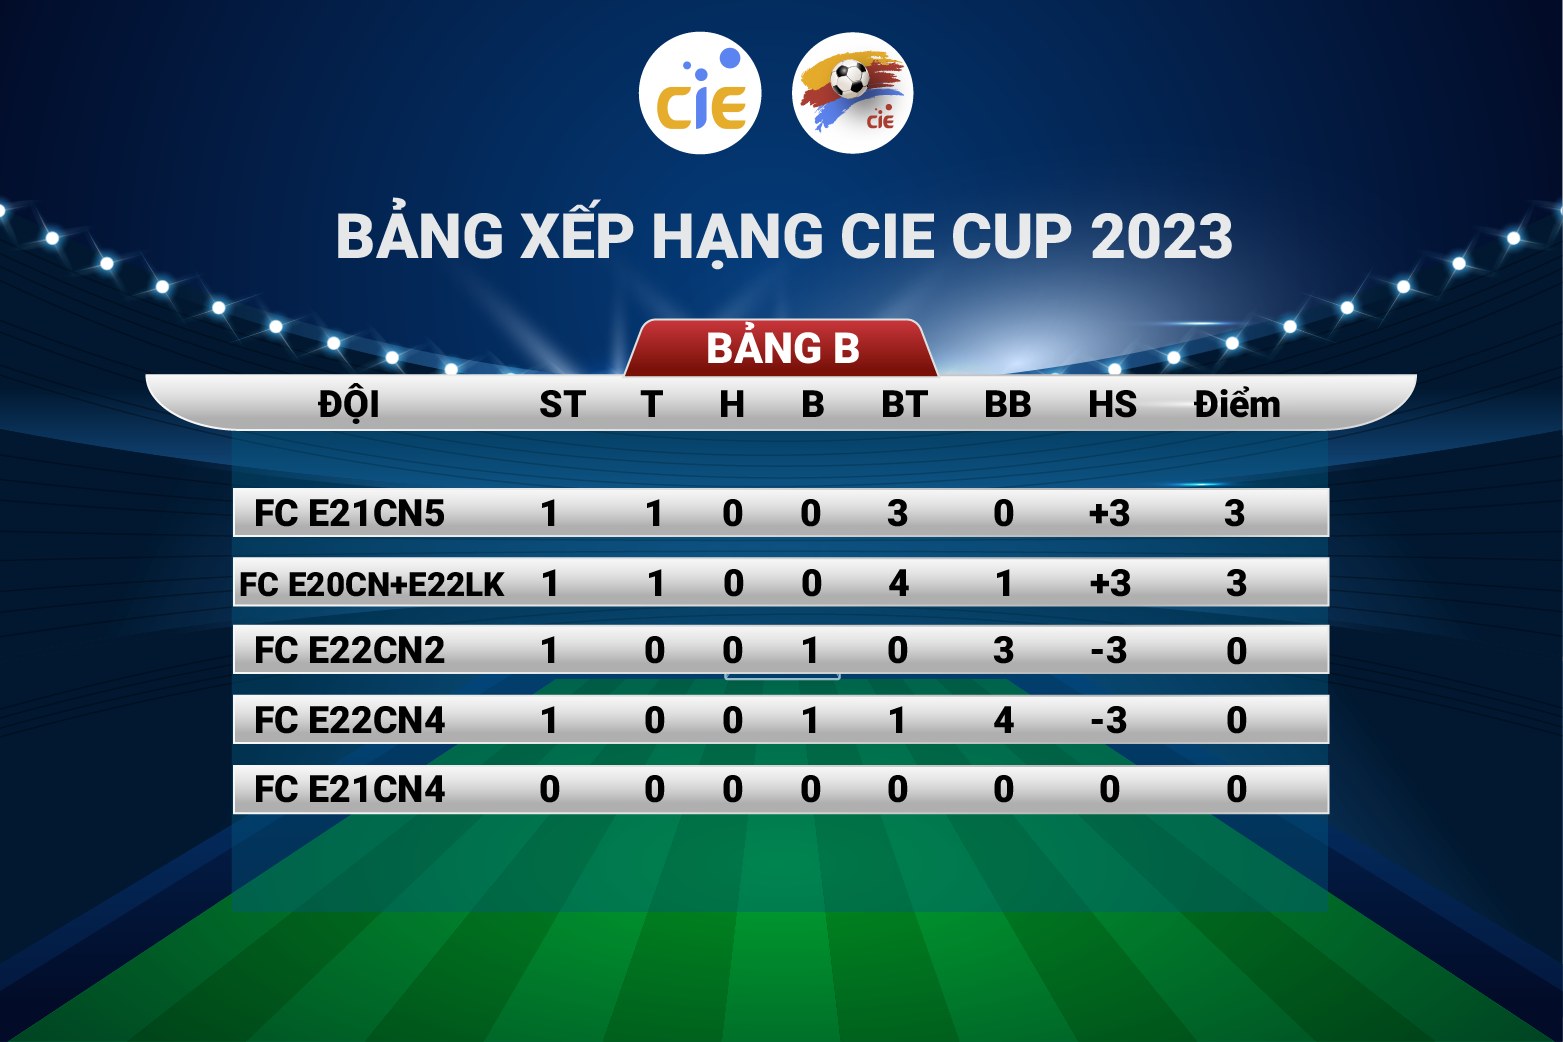 CIE CUP 2023 Rankings of table B